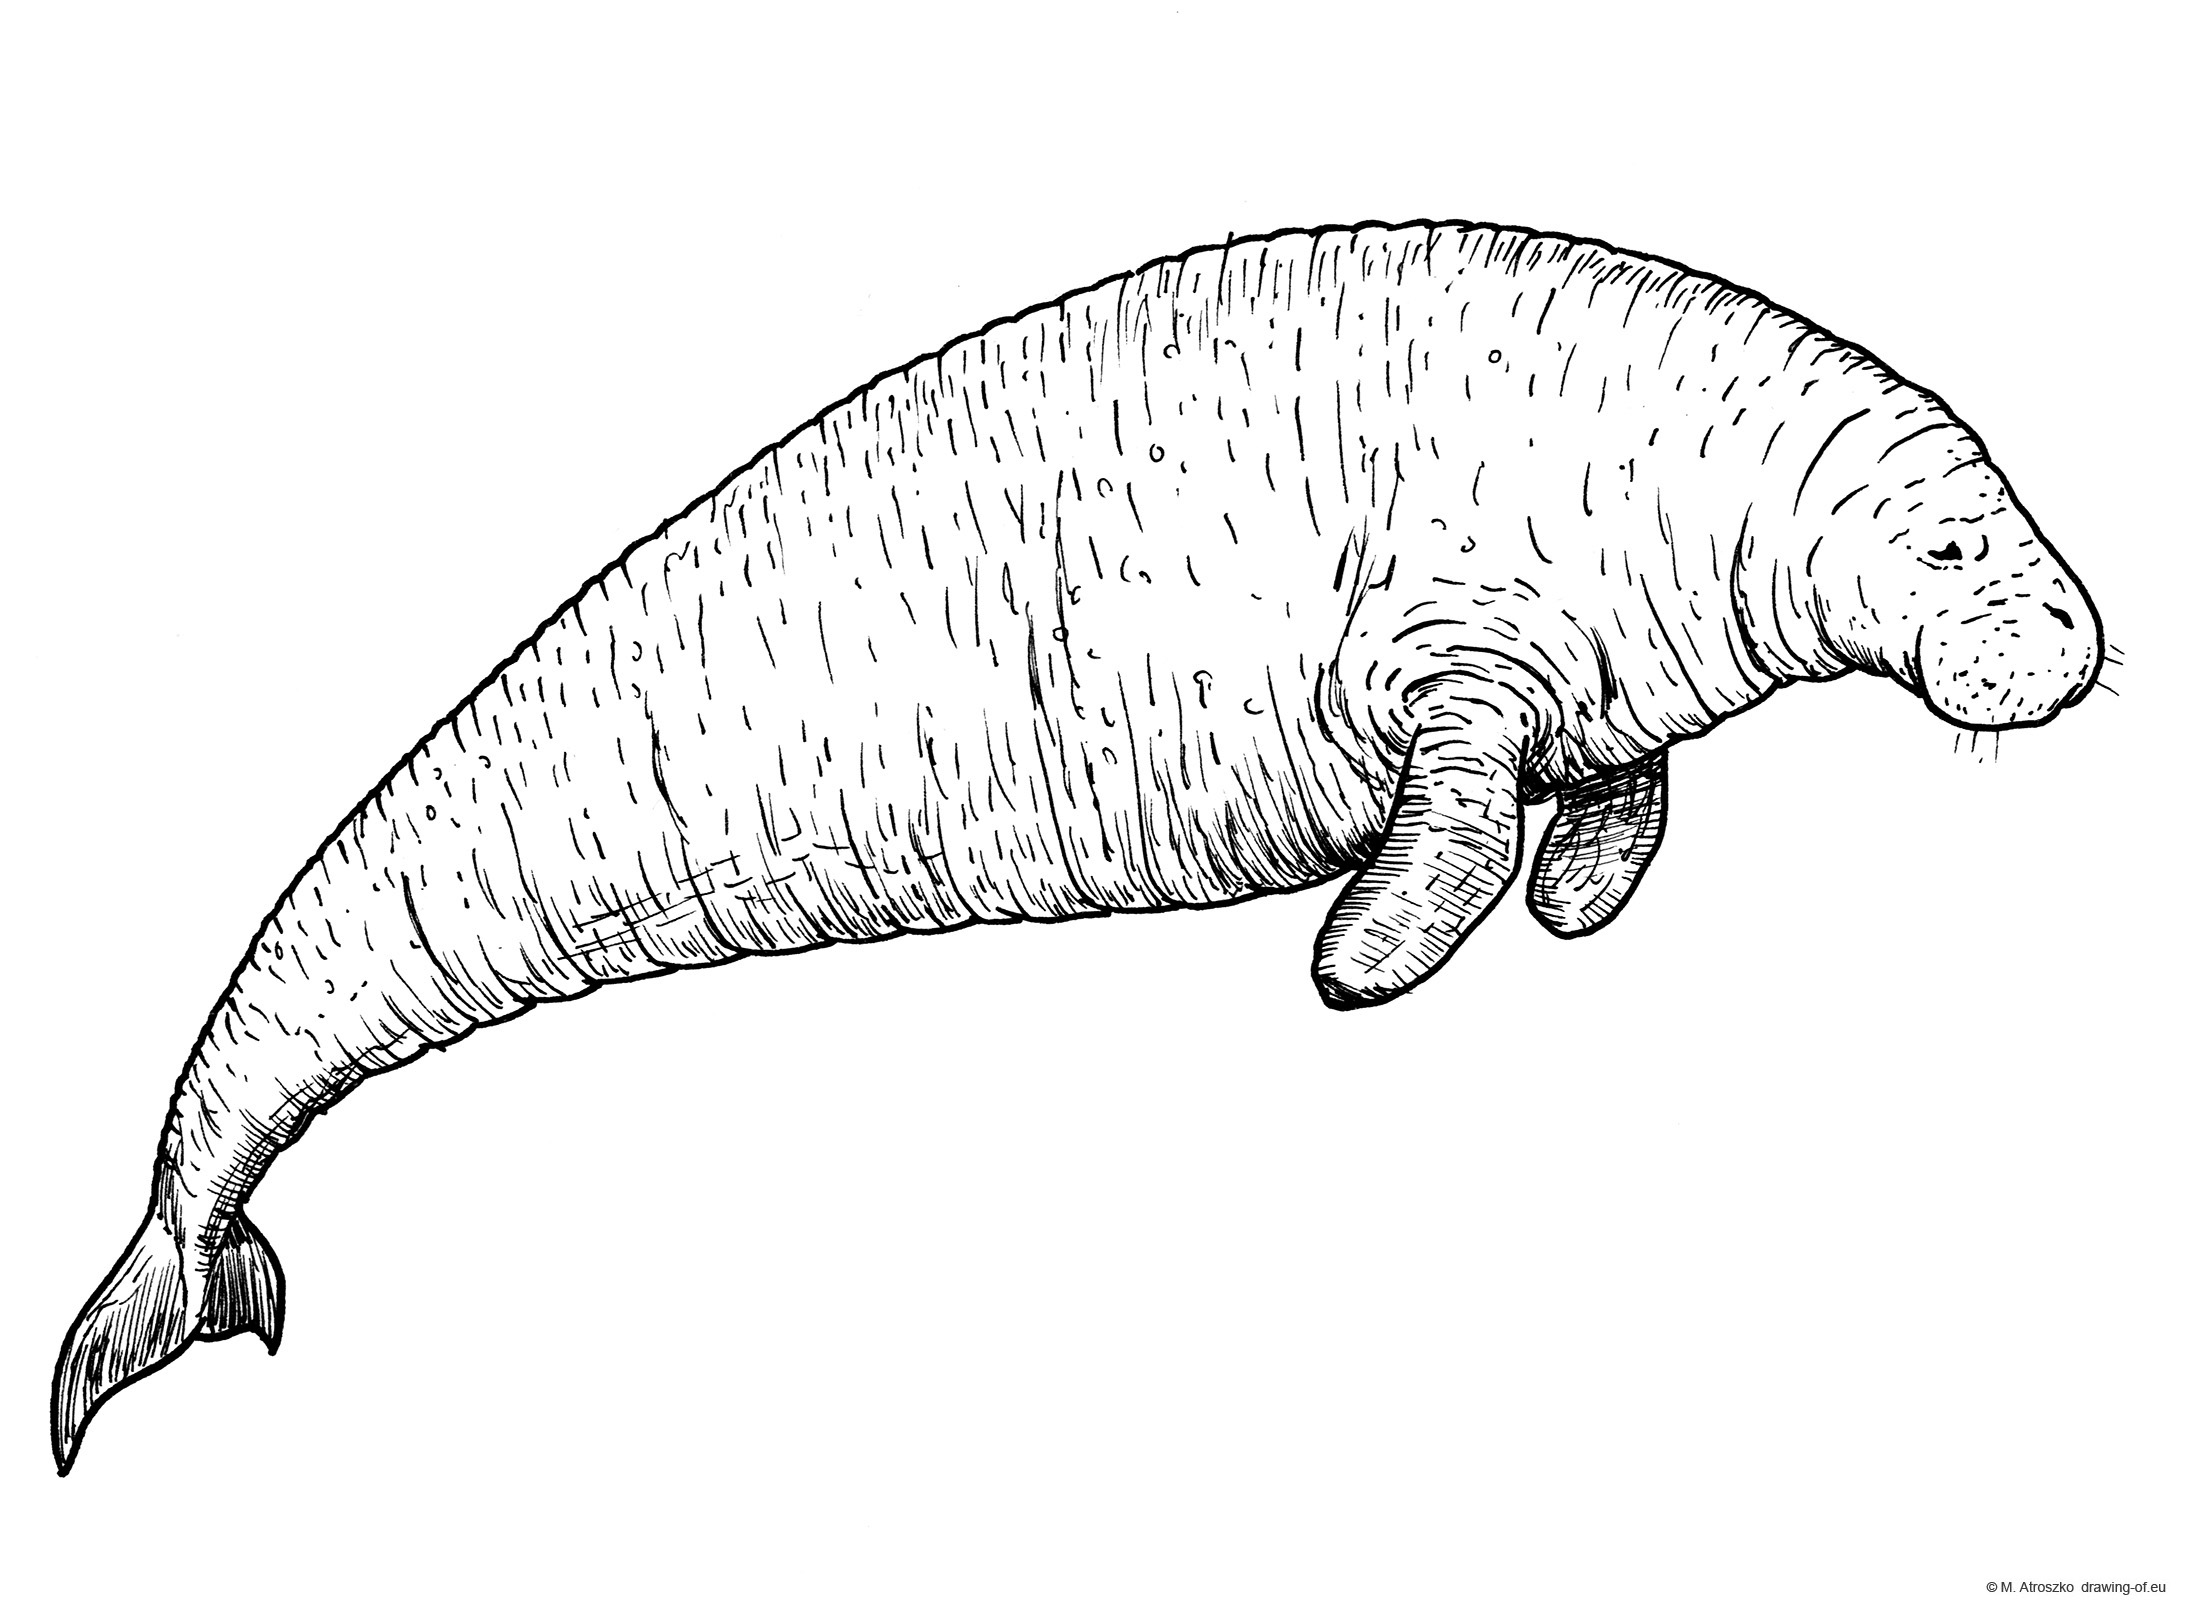 Steller's sea cow drawing